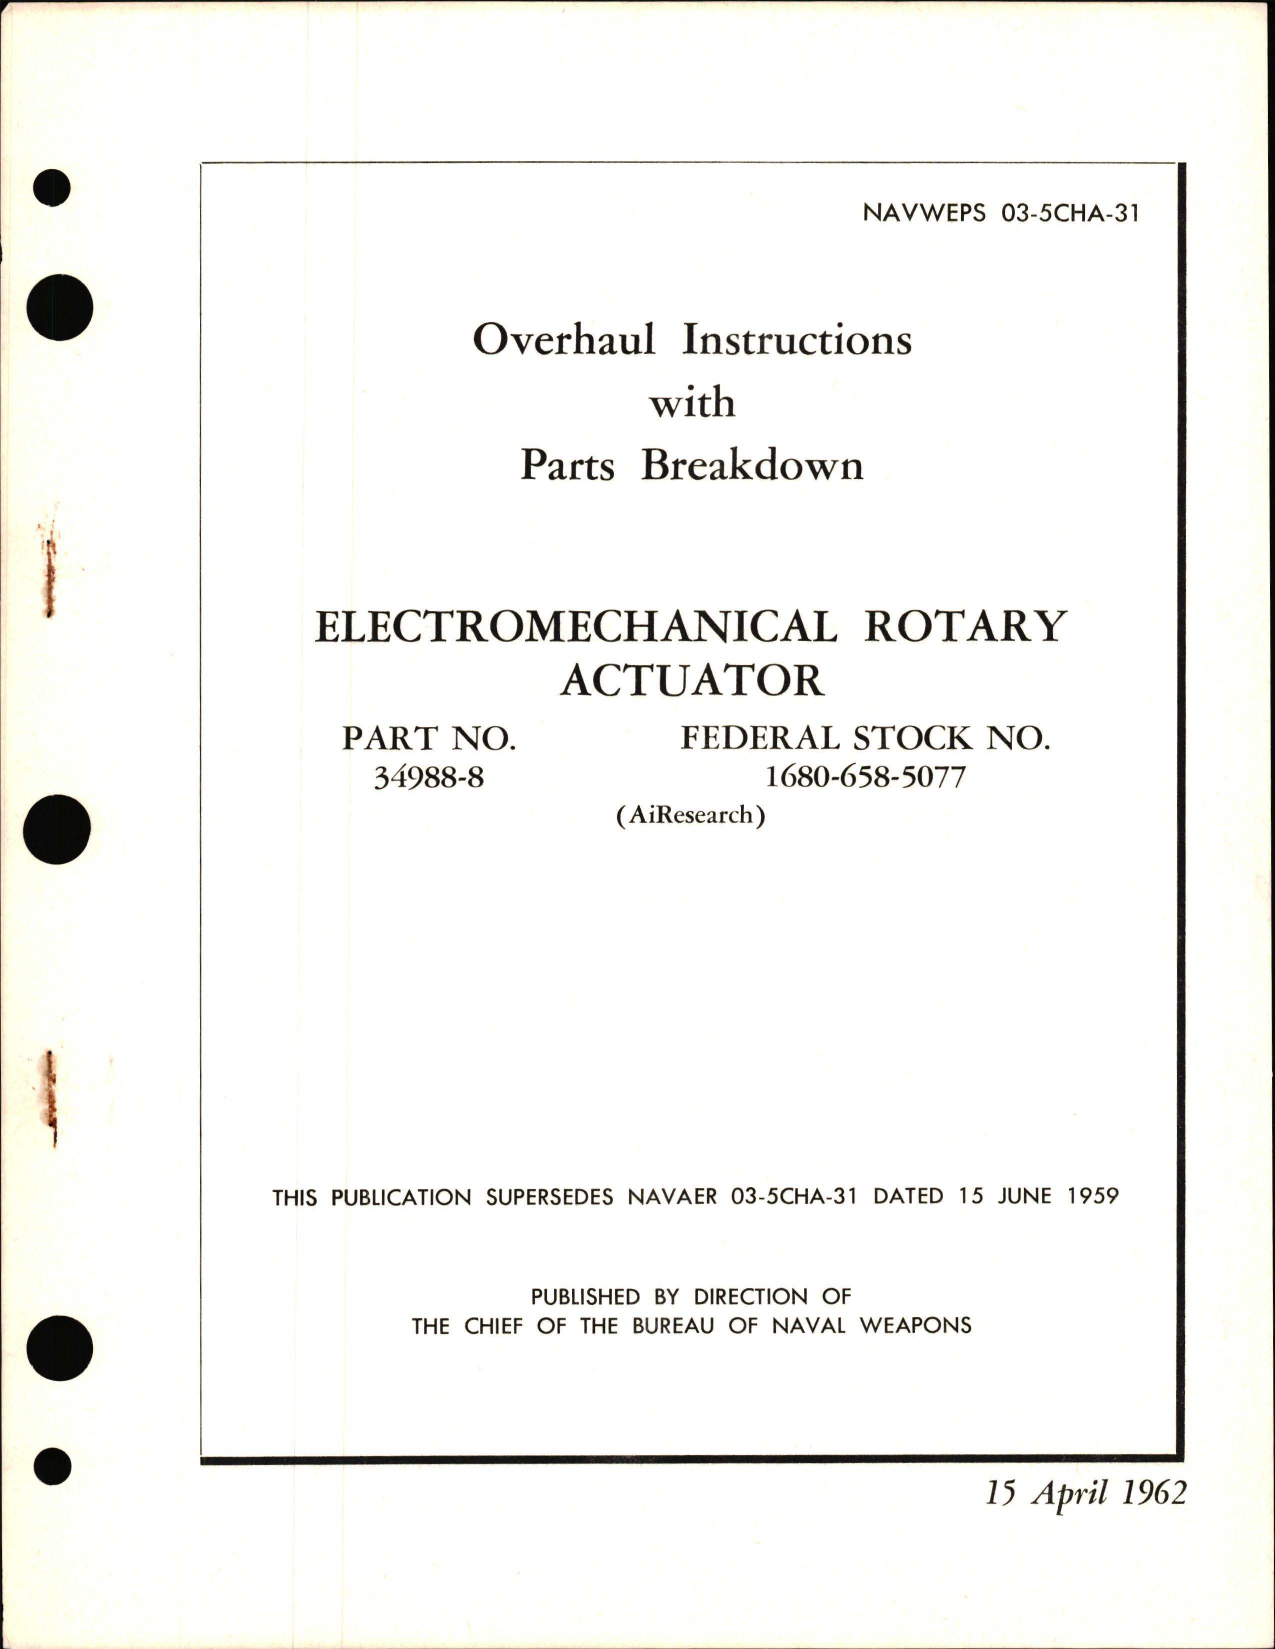 Sample page 1 from AirCorps Library document: Overhaul Instructions with Parts Breakdown for Electromechanical Rotary Actuator - Part 34988-8